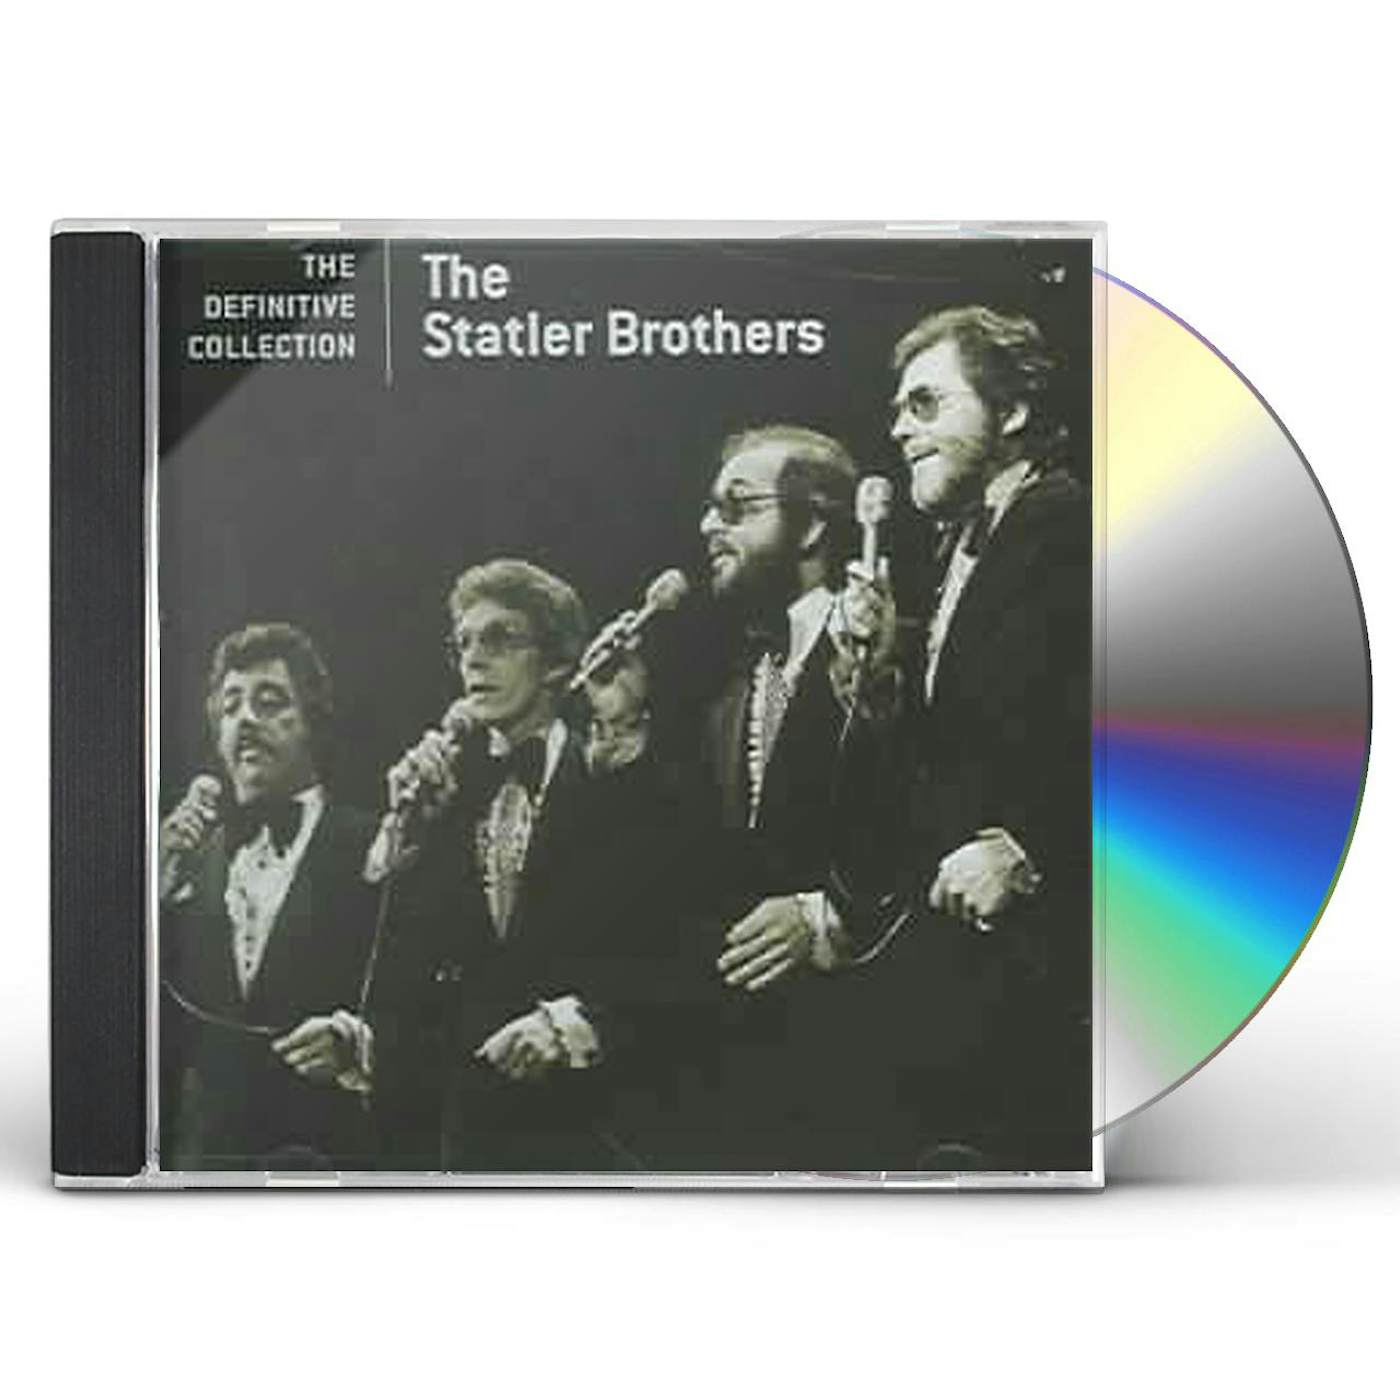 The Statler Brothers DEFINITIVE COLLECTION CD